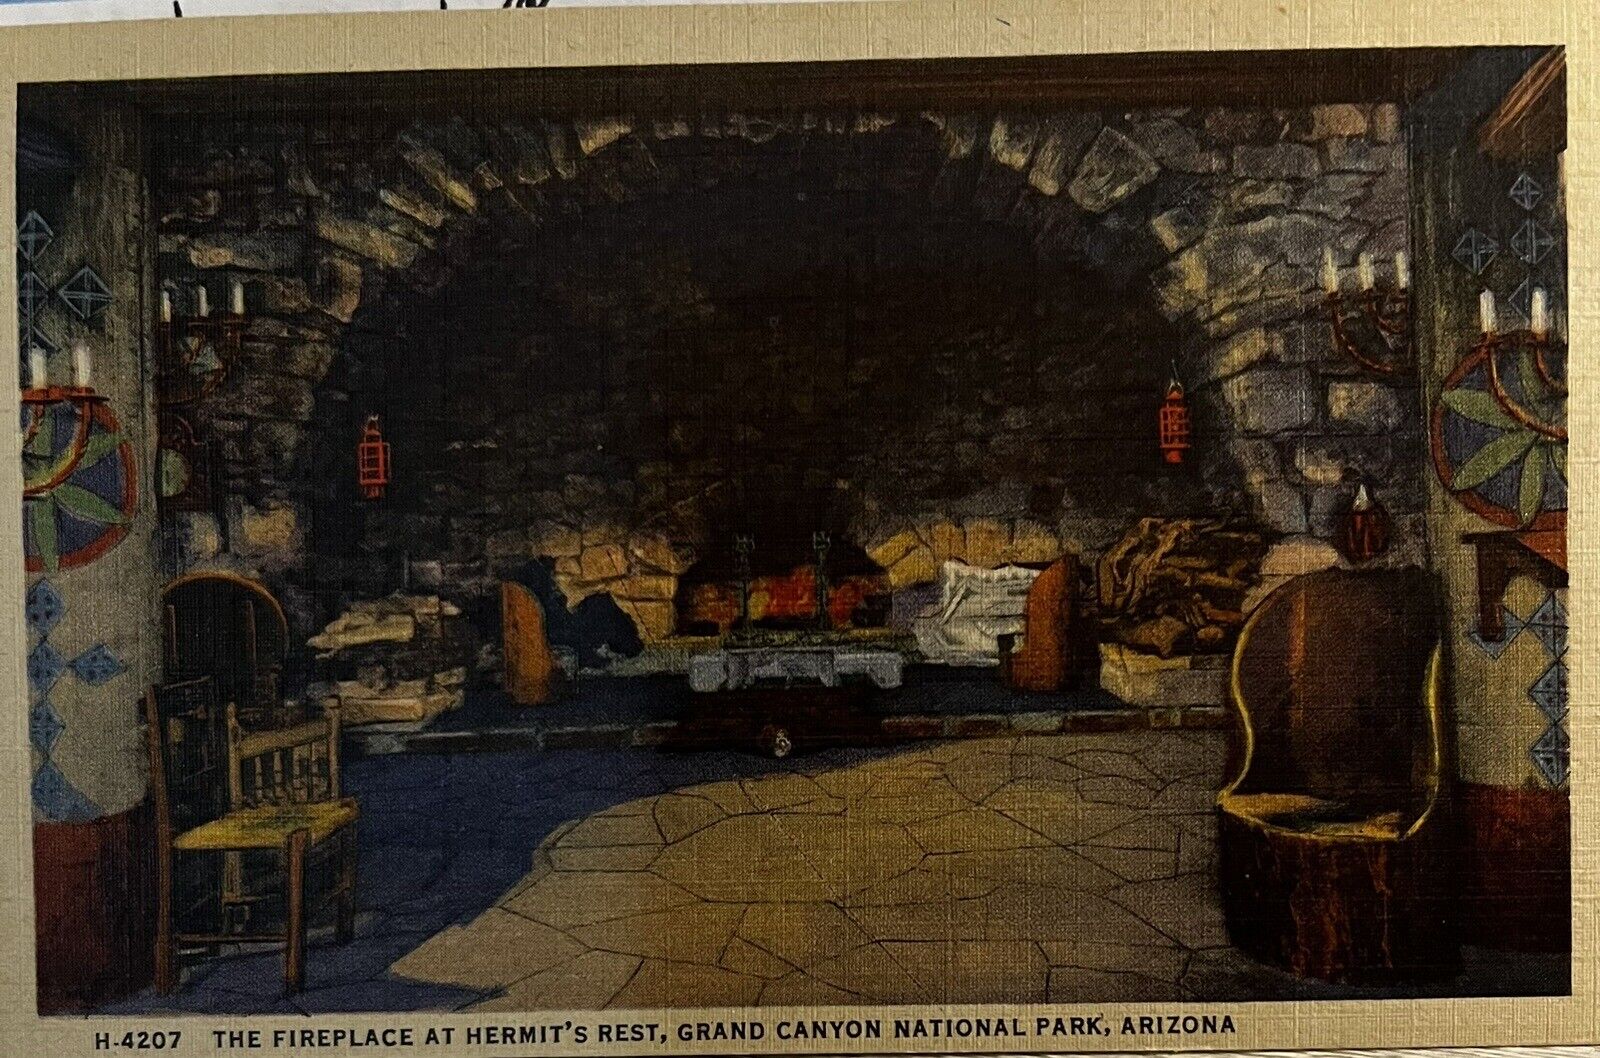 1947 unused extremely rare postcard, Fireplace at Hermit's Rest, Grand Canyon